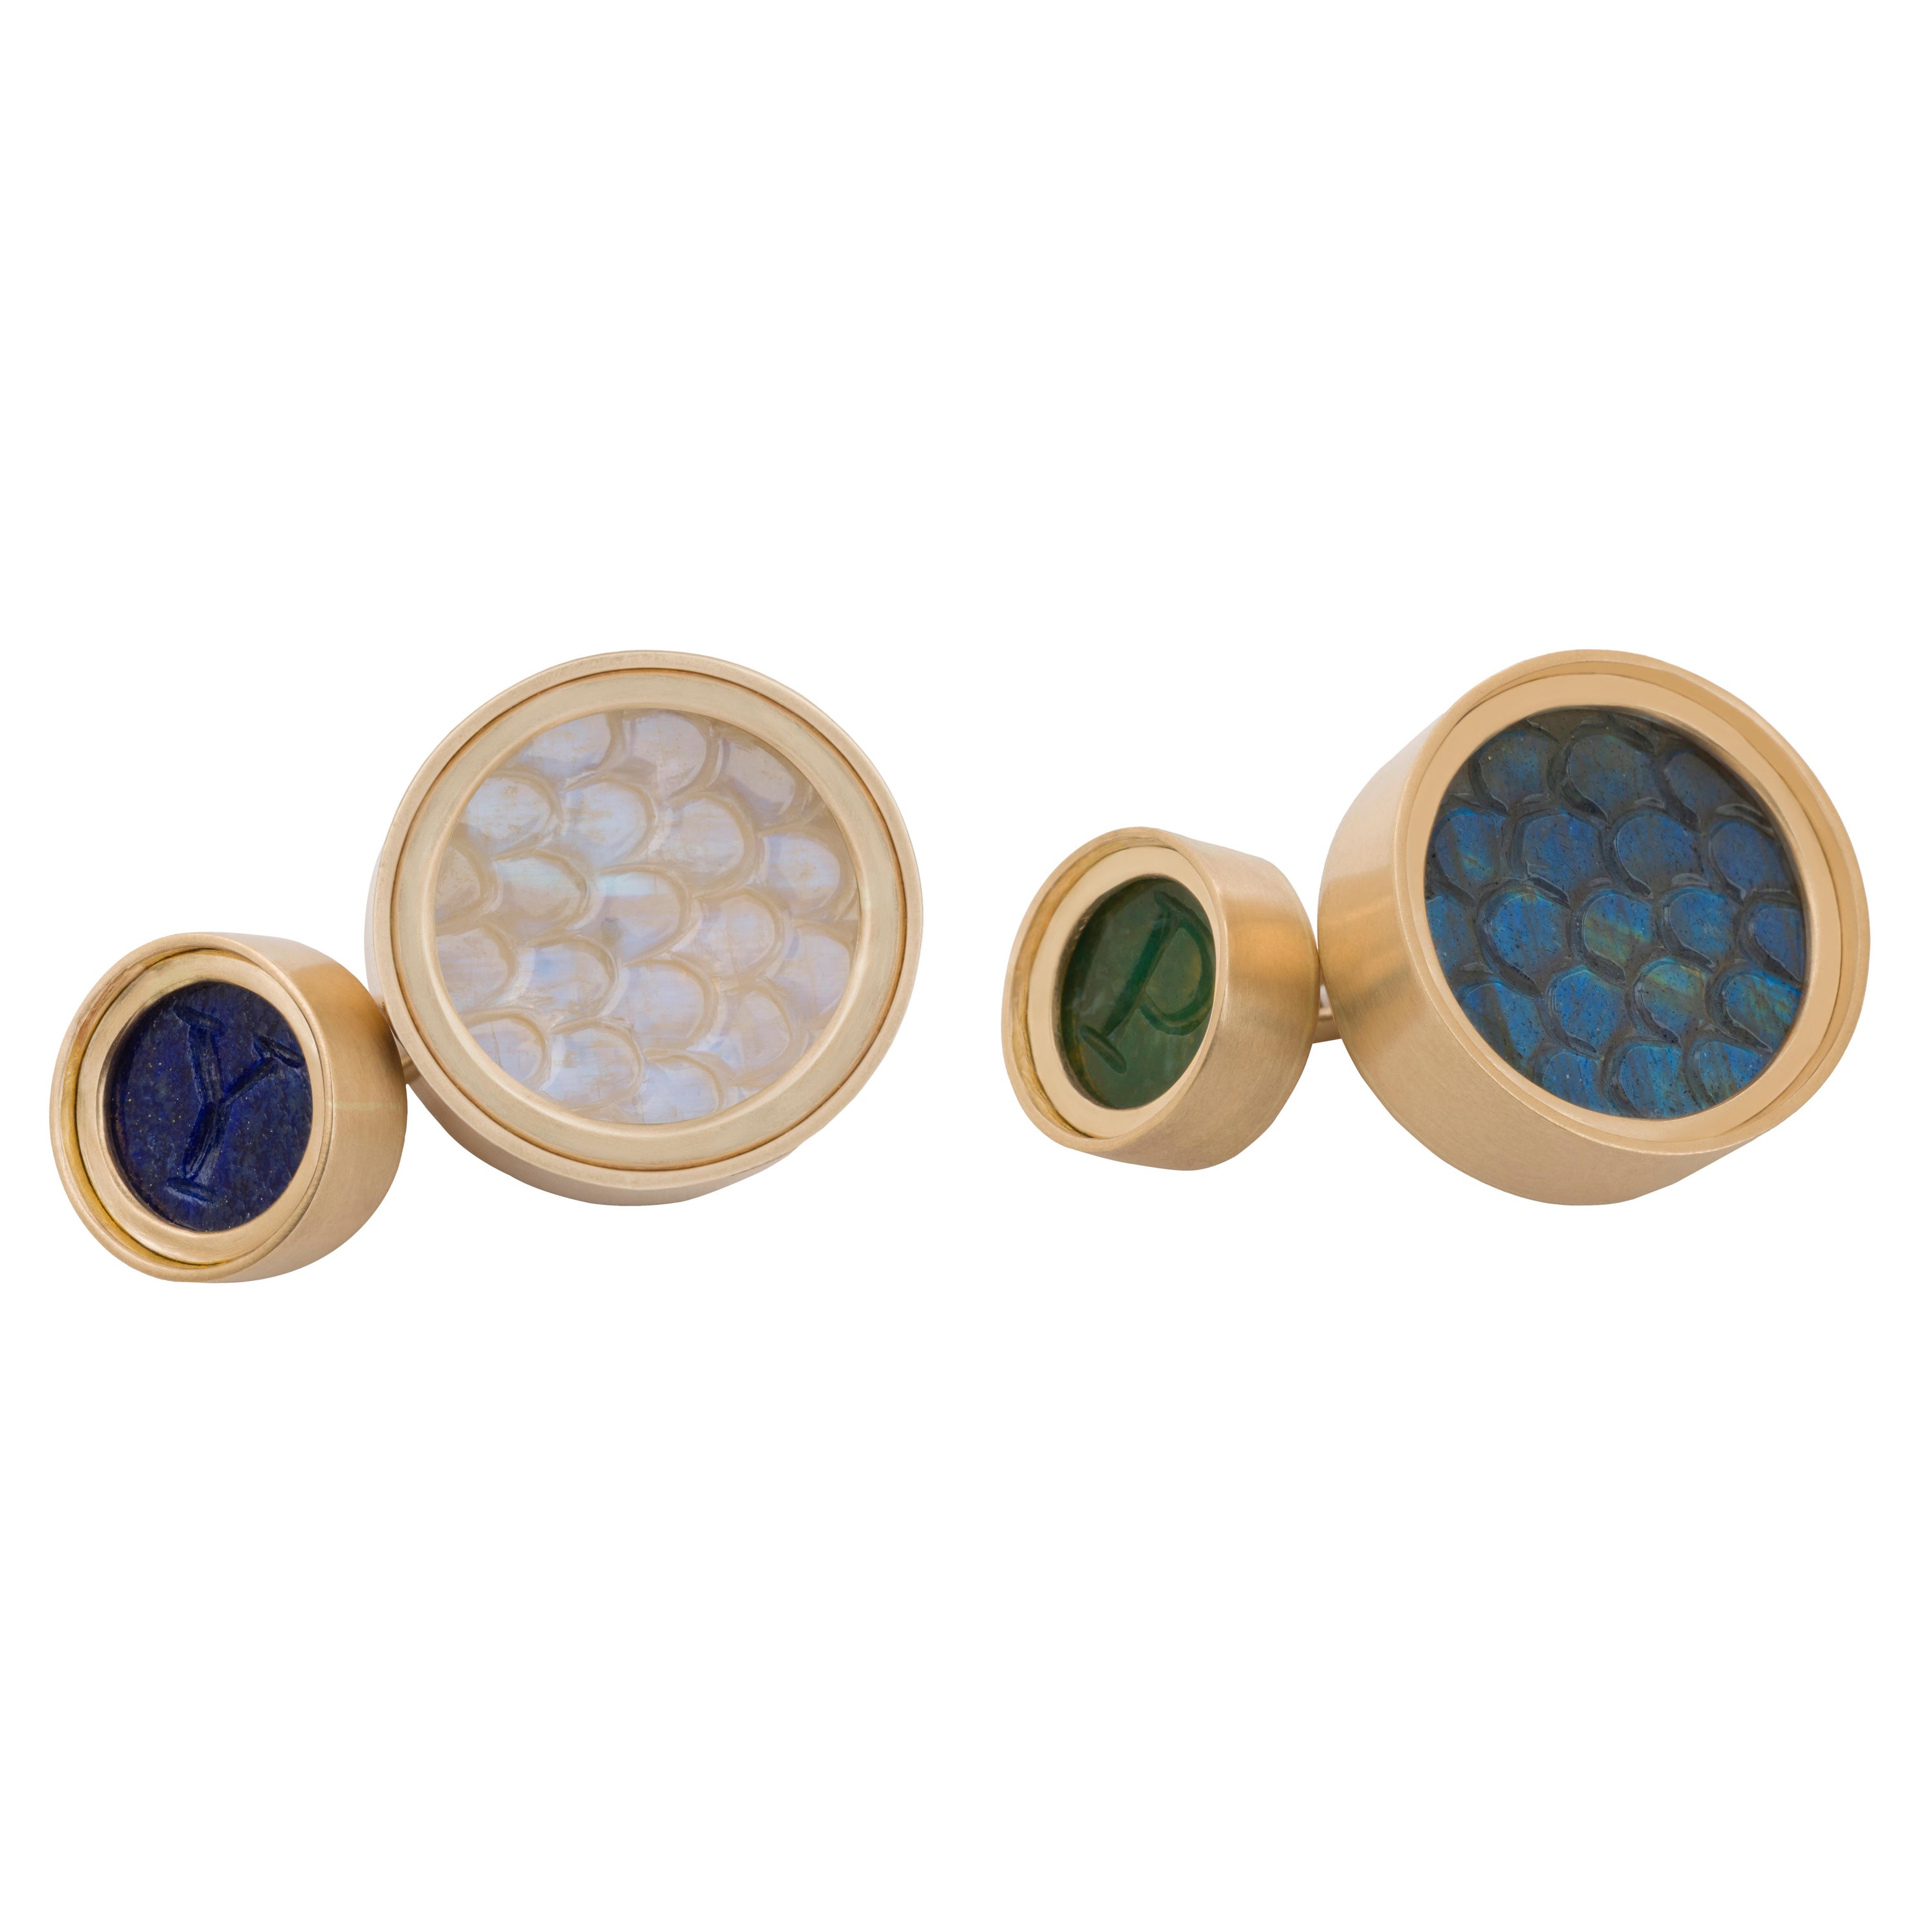 Ouroboros Snakeskin Cufflinks set in Gold For Sale